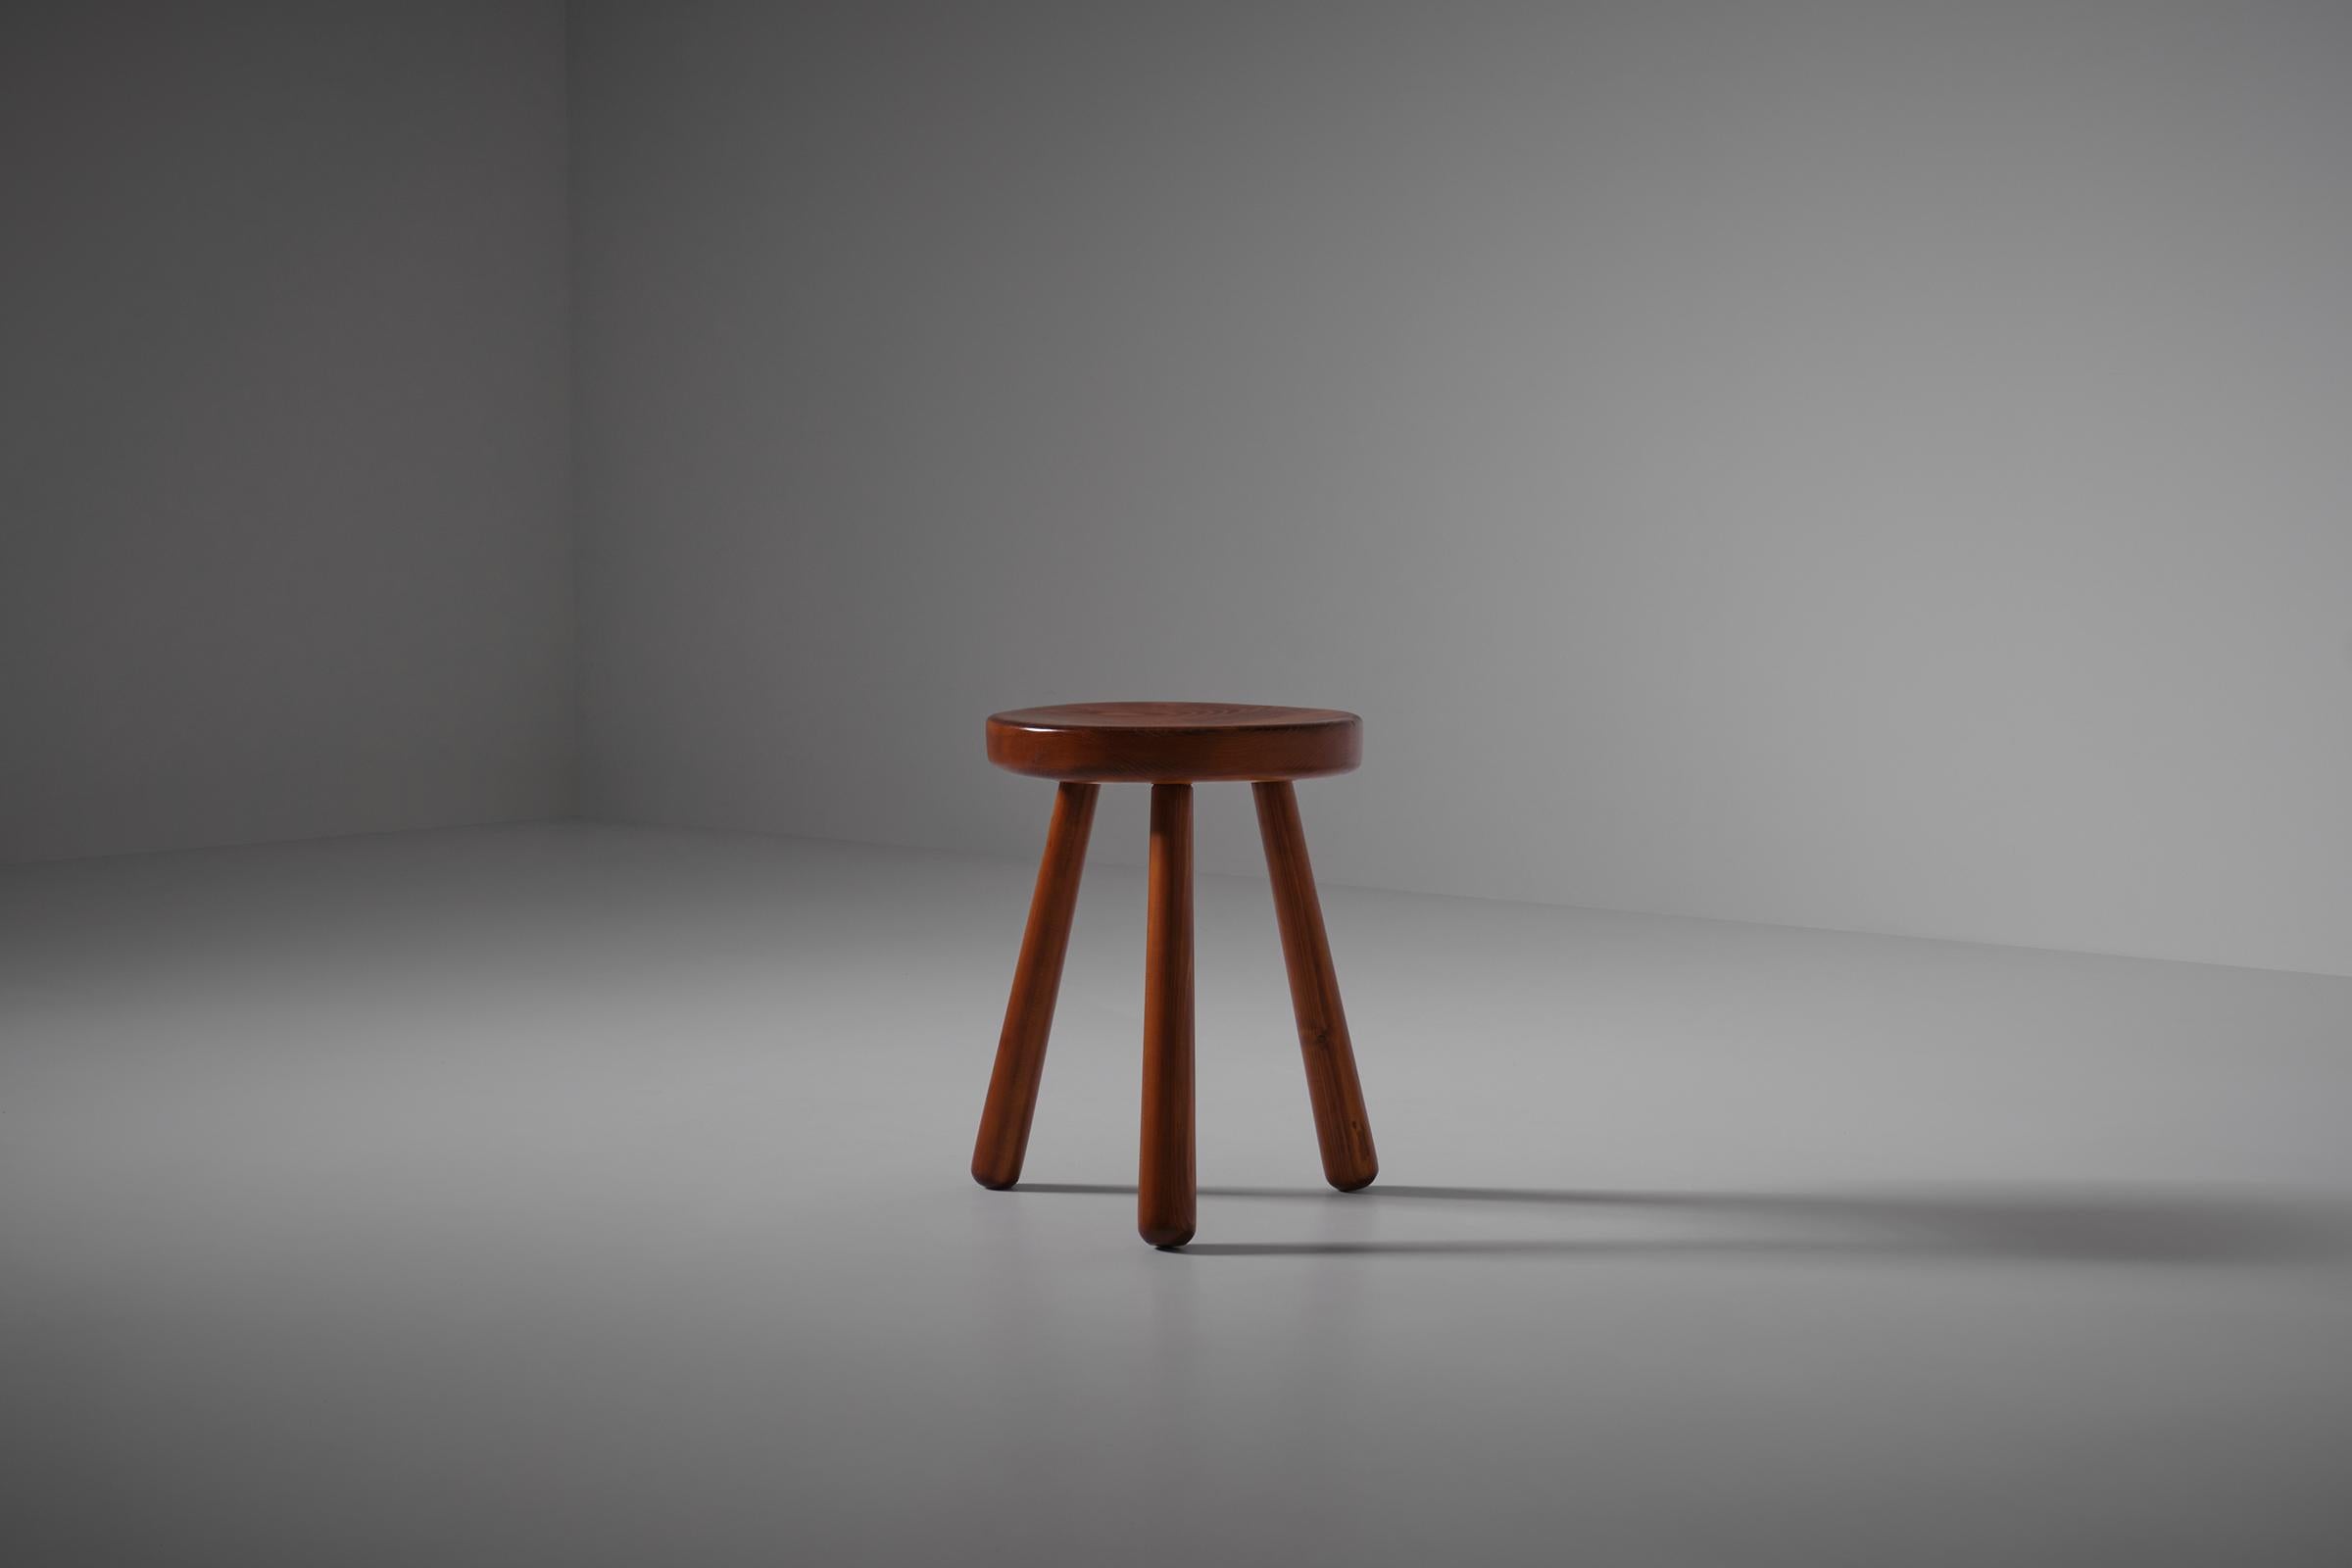 French Midcentury Modern Stool in Pine, France 1960s For Sale